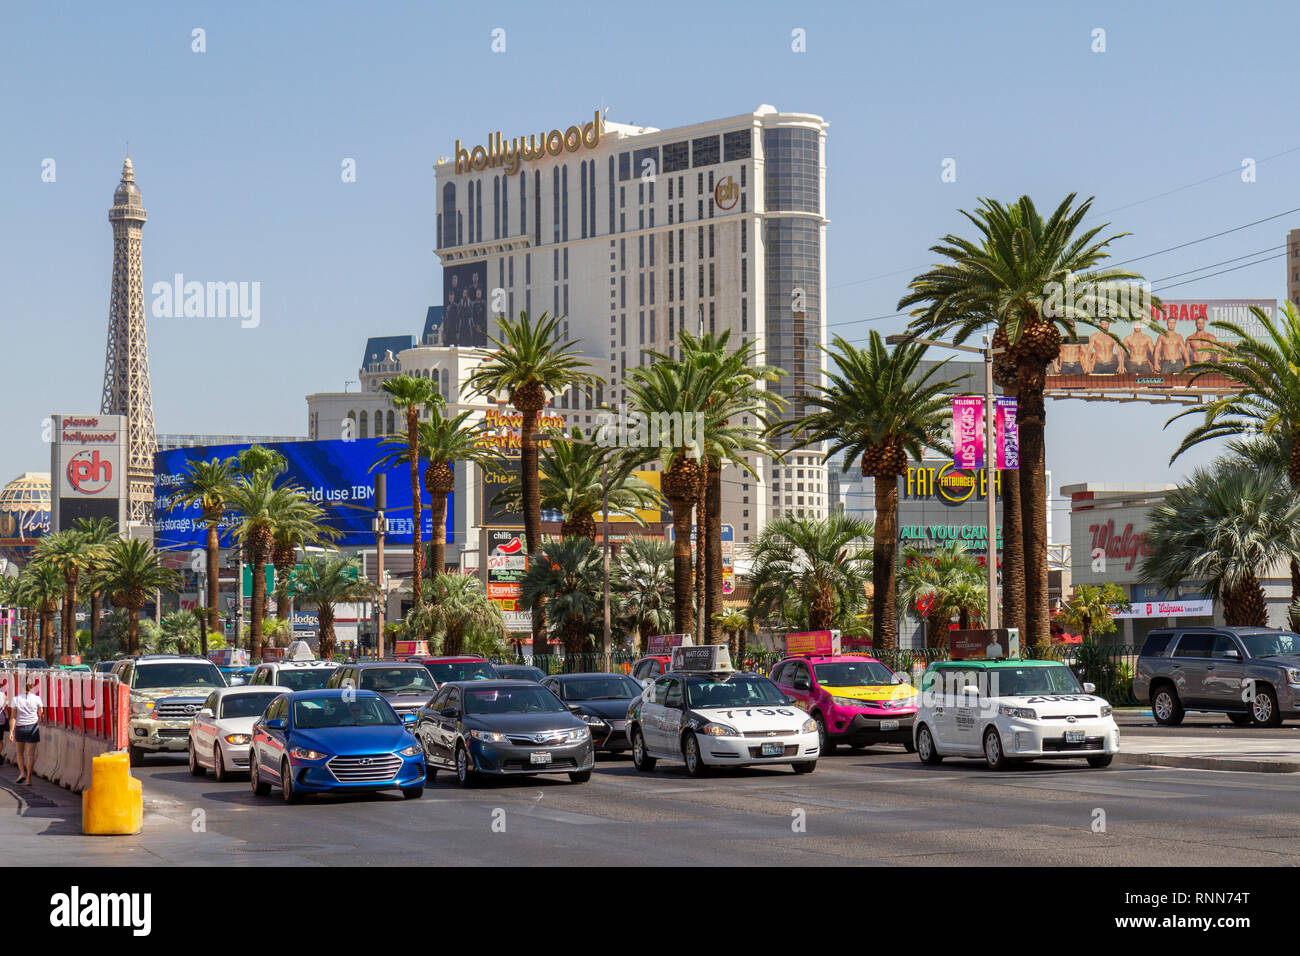 Cars waiting at traffic lights on The Strip, Las Vegas, Nevada, United States. Stock Photo